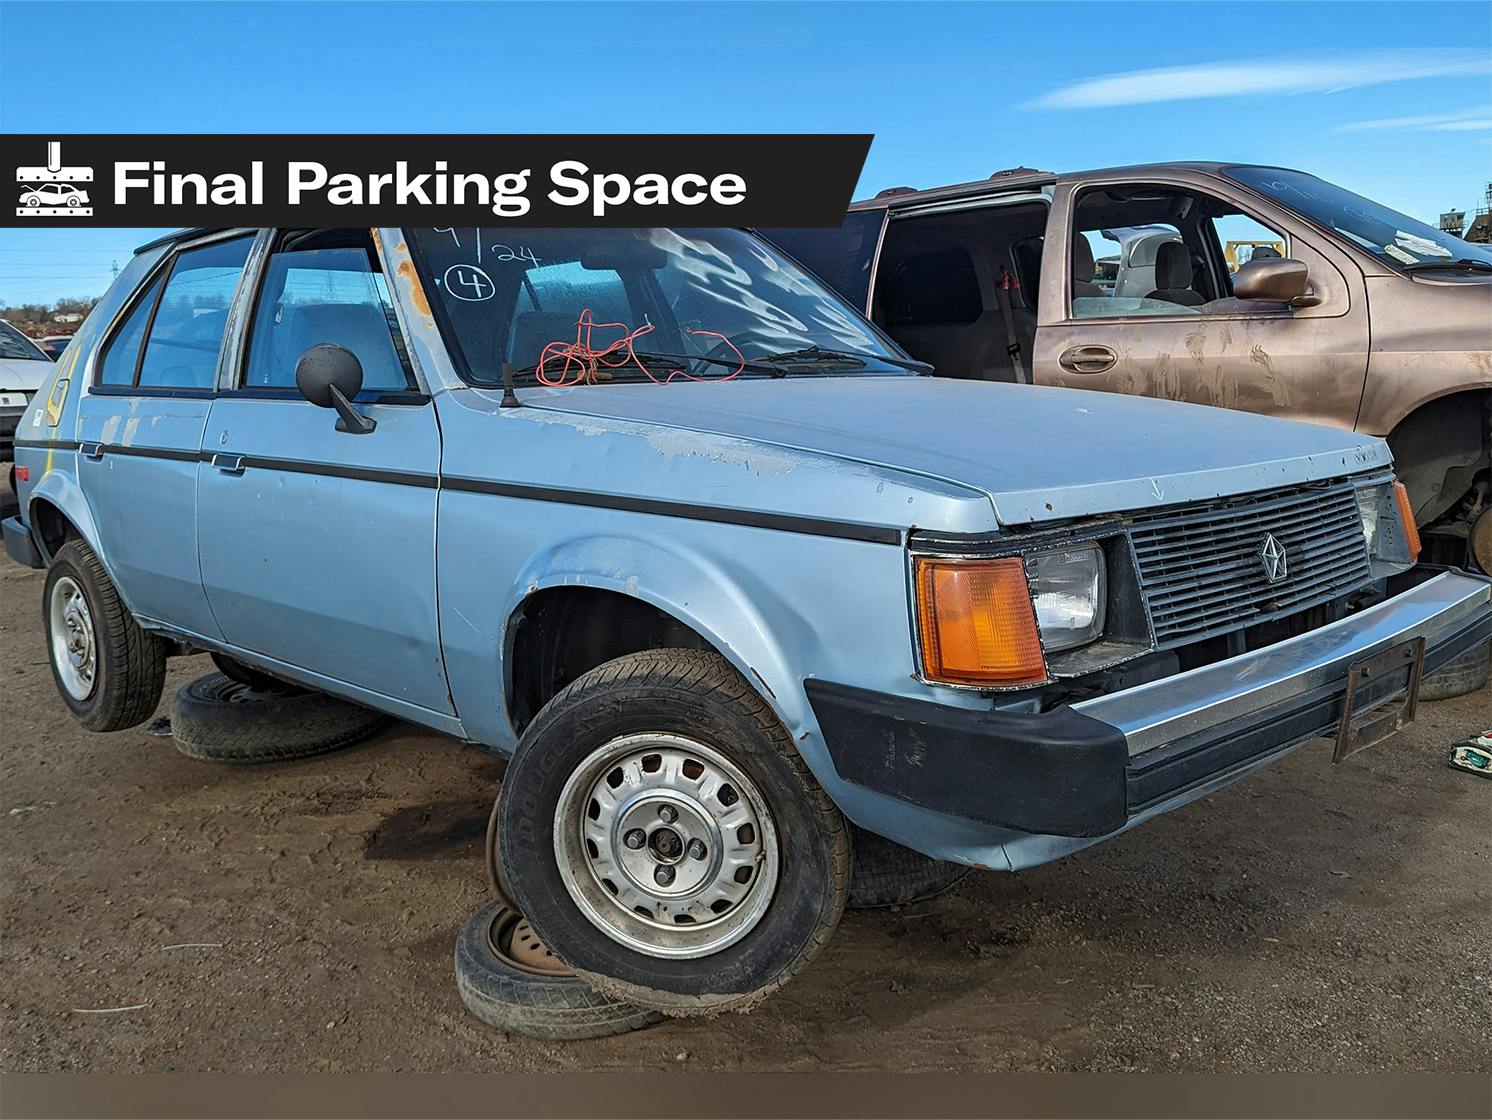 Final Parking Space: 1988 Plymouth Horizon America - Hagerty Media